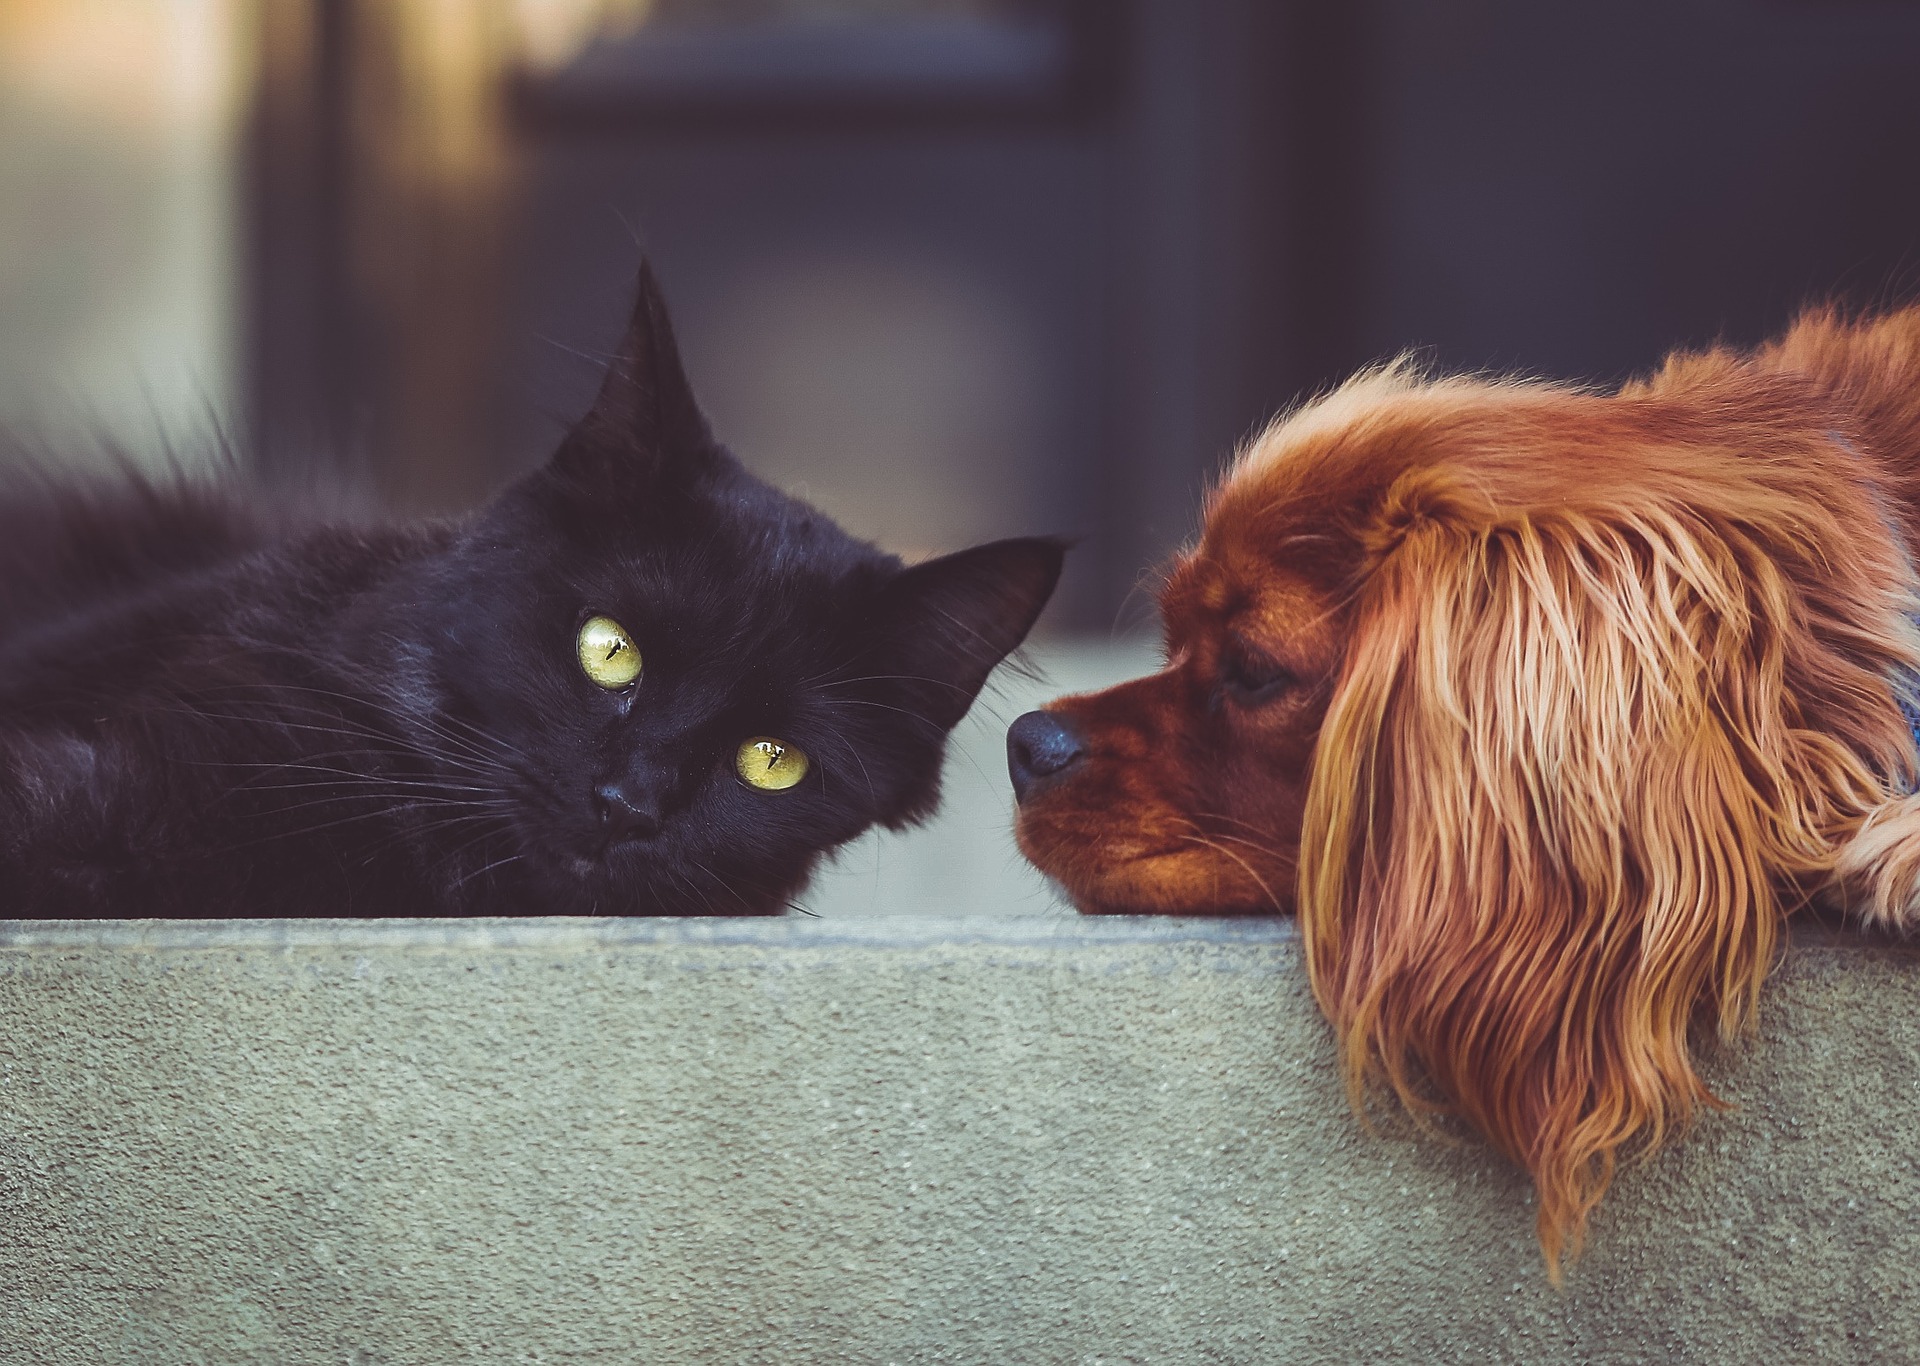 Dog and cat: is cohabitation possible?